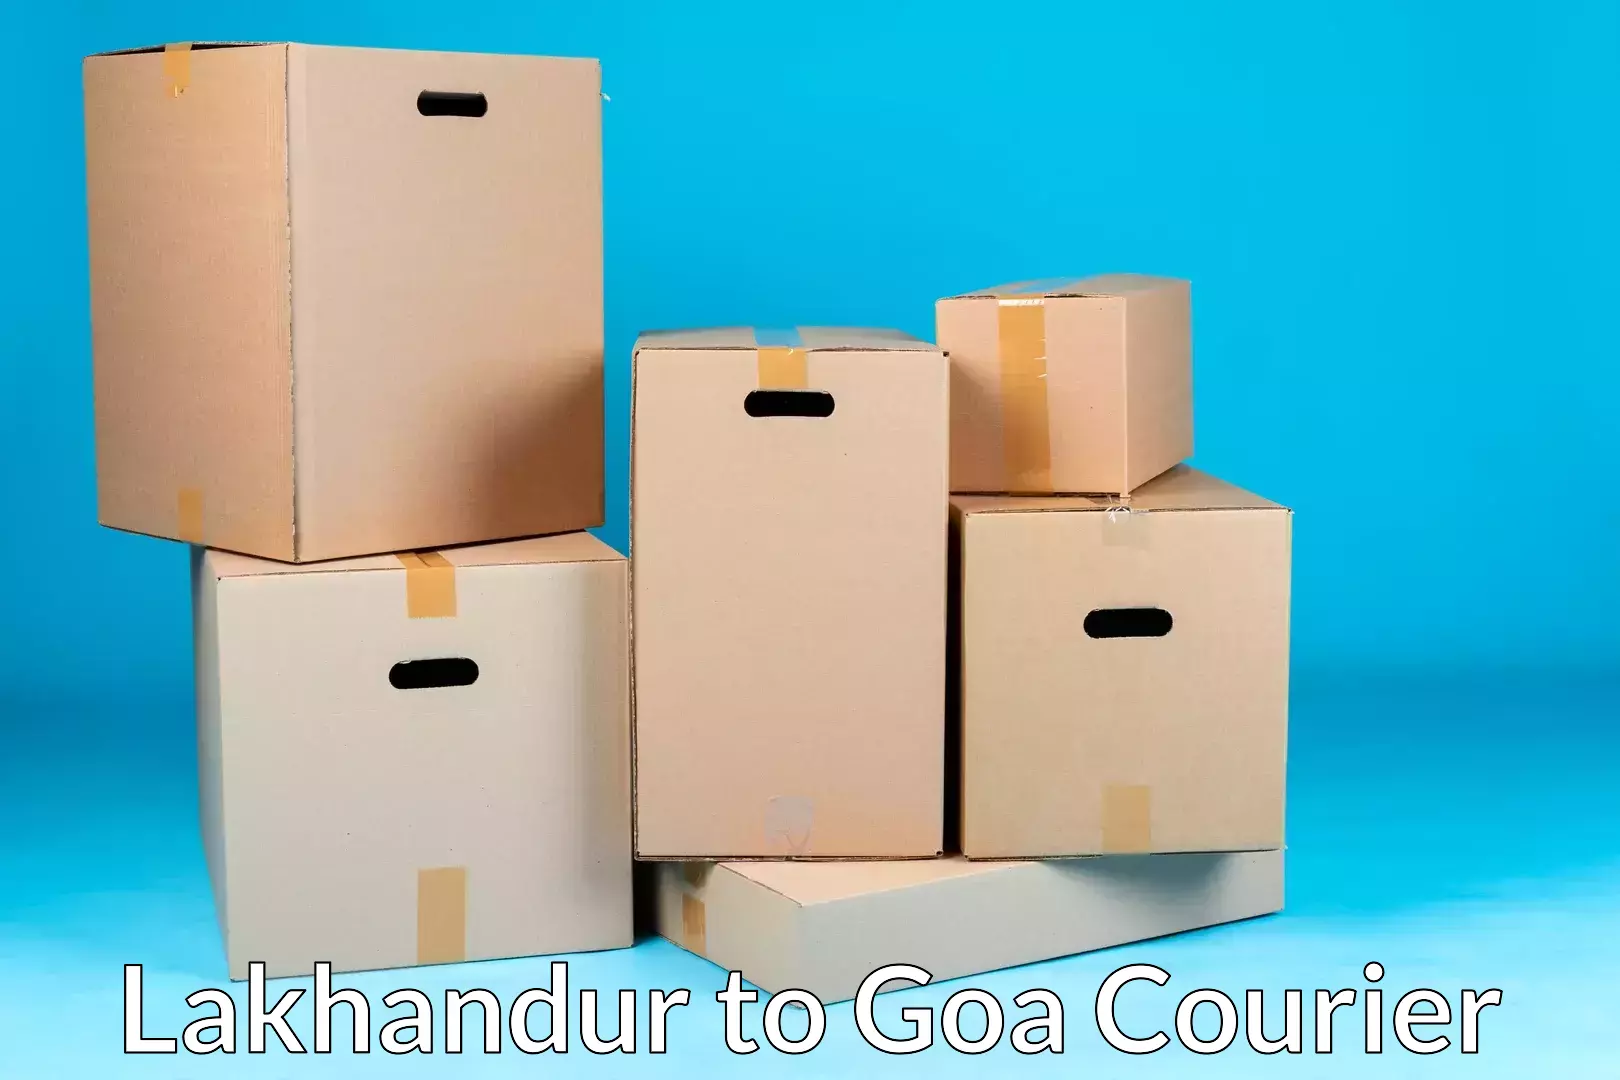 Efficient relocation services Lakhandur to South Goa